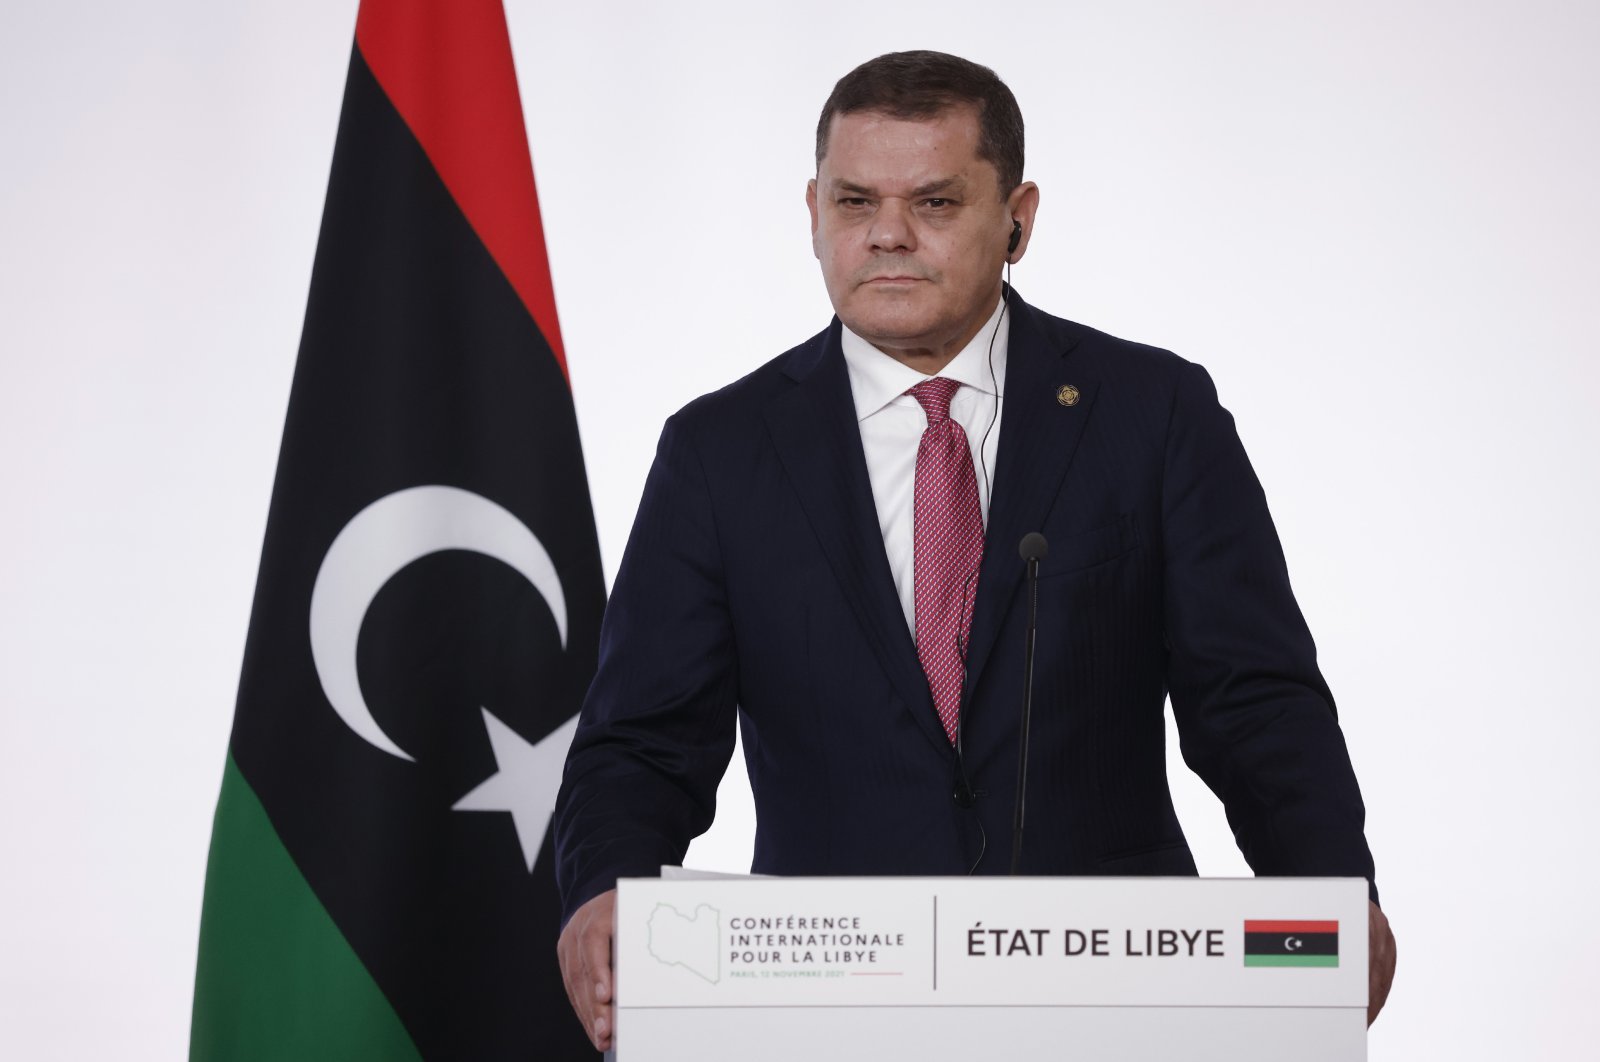 Libyan Prime Minister Abdul Hamid Mohammed Dbeibah during a press conference following a summit on Libya in Paris, France, Nov. 12, 2021. (AP Photo)